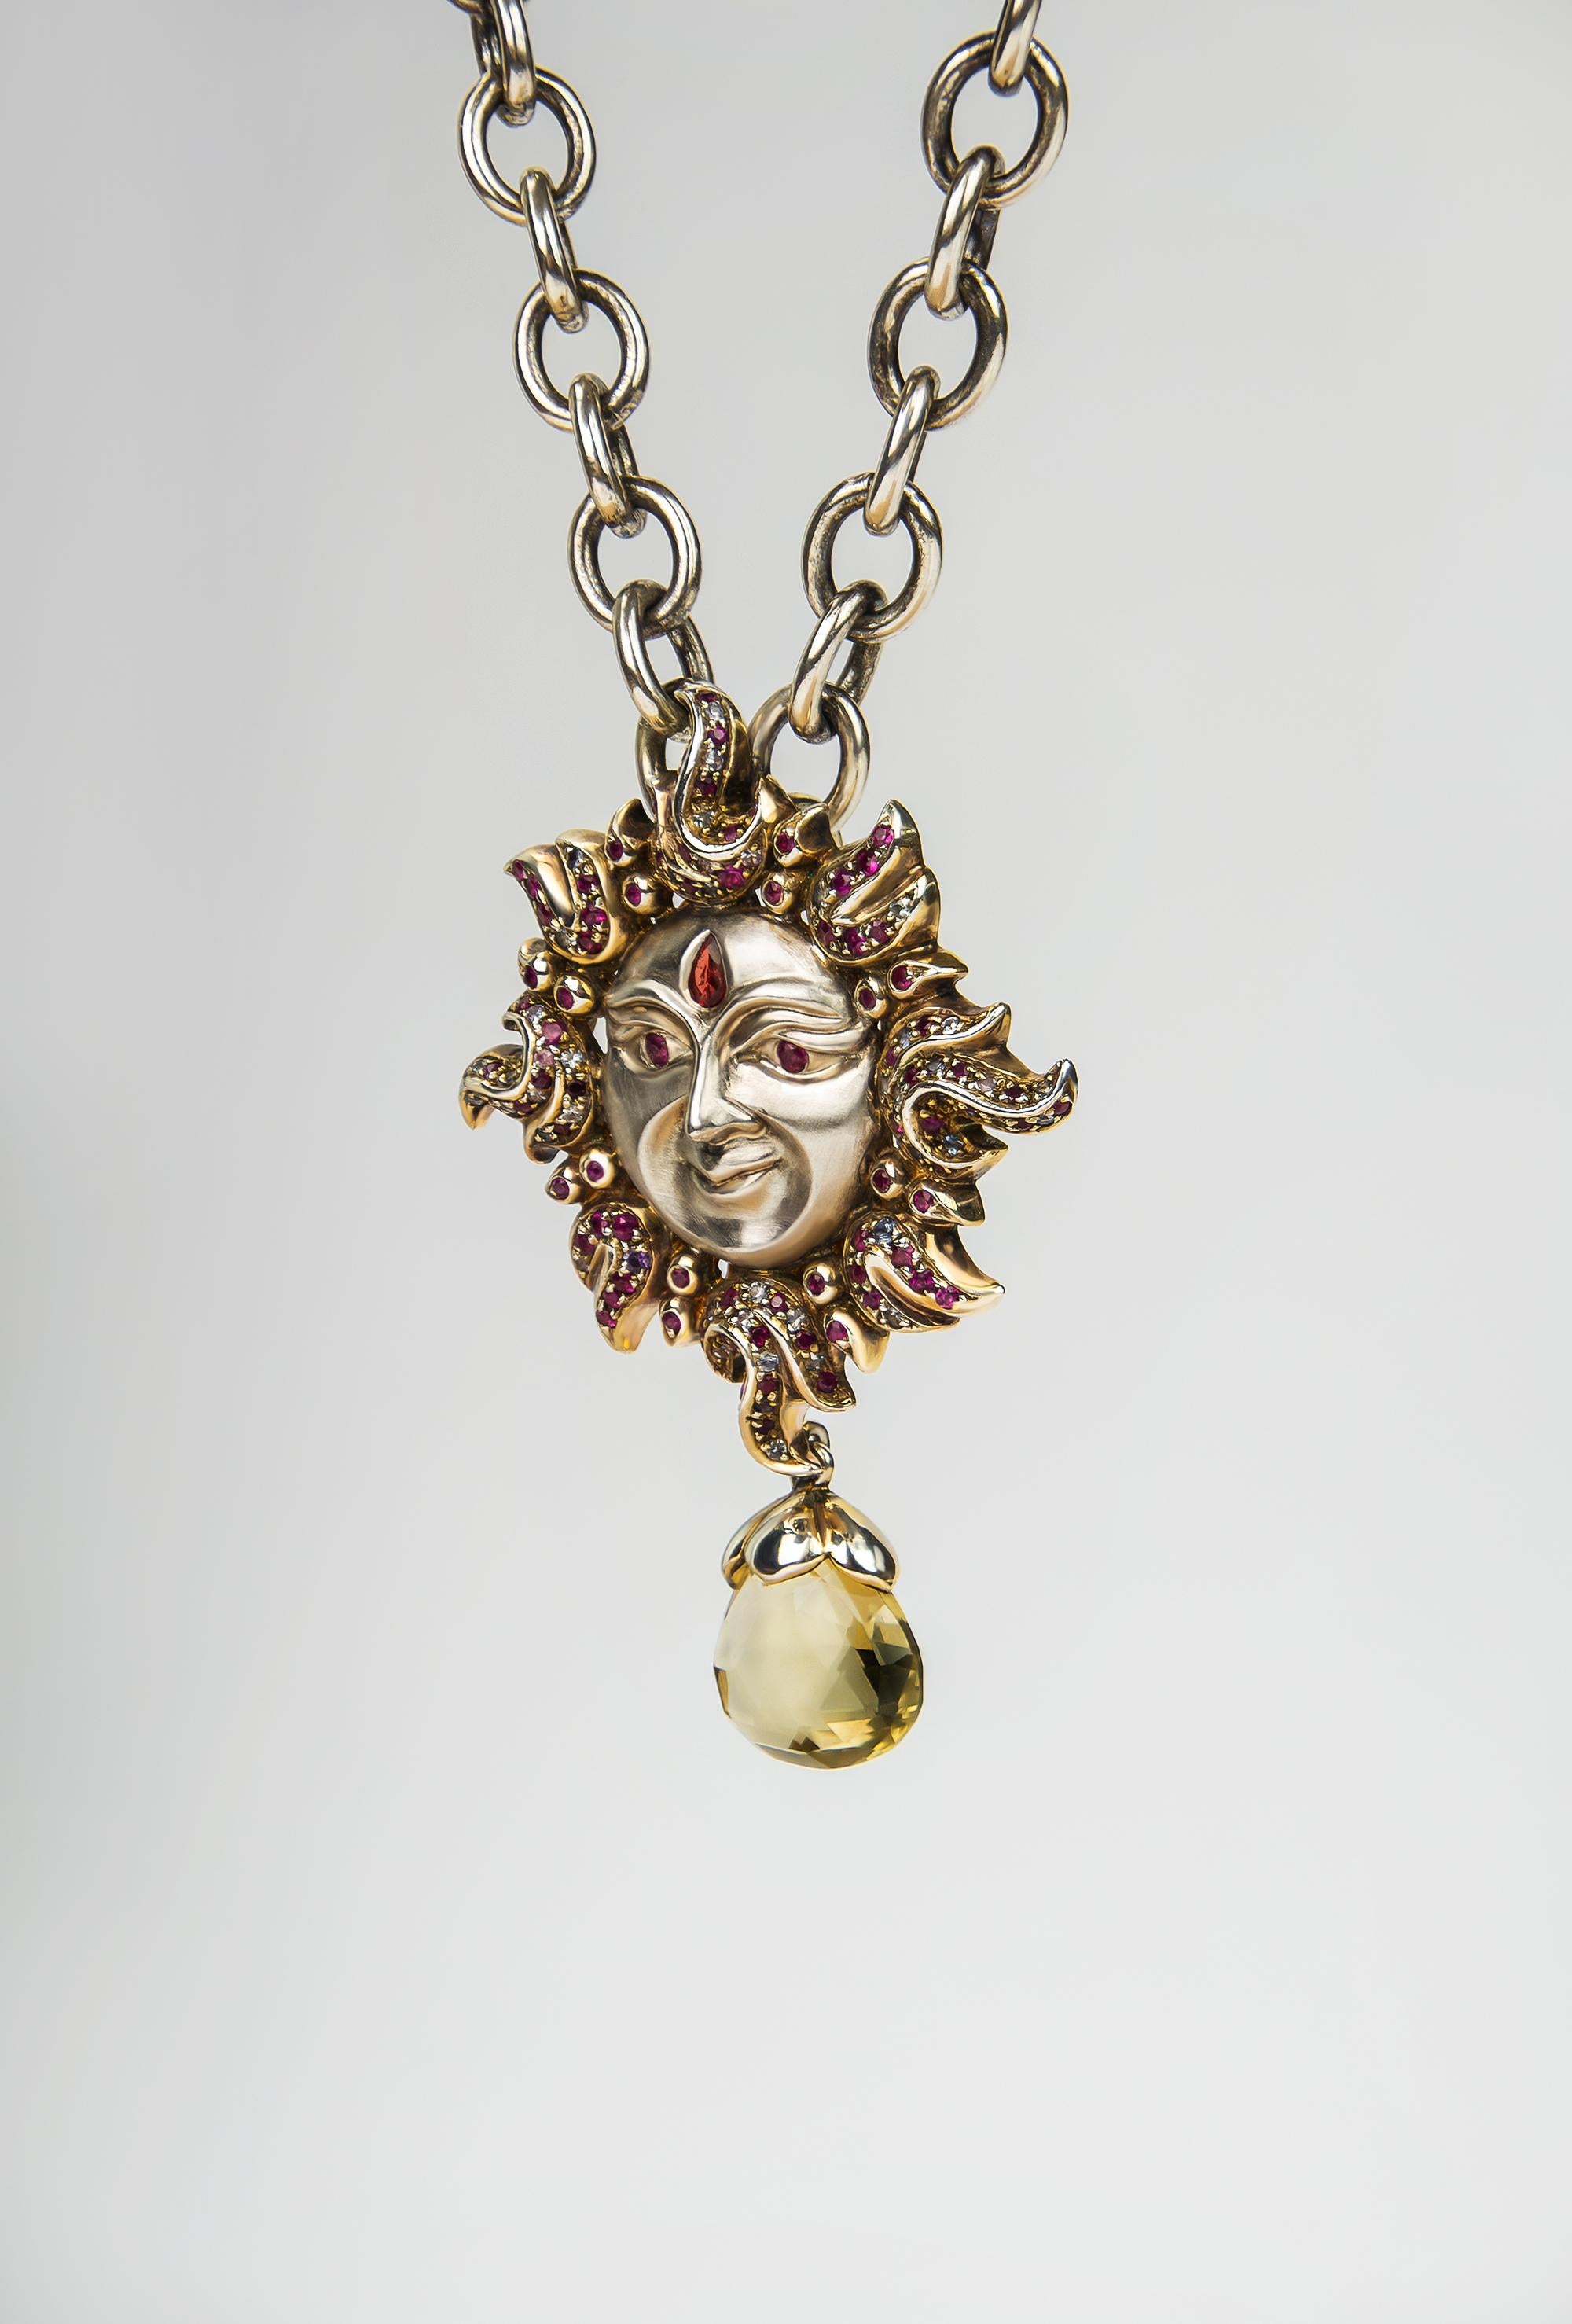 The Regal Fantasy Sun Necklace will add some radiance to your jewellery collection. Featuring a gleaming portrayal of the sun, it is a showcase of craftsmanship drawing influences from Baroque and hints at Renaissance art. 

The design has been